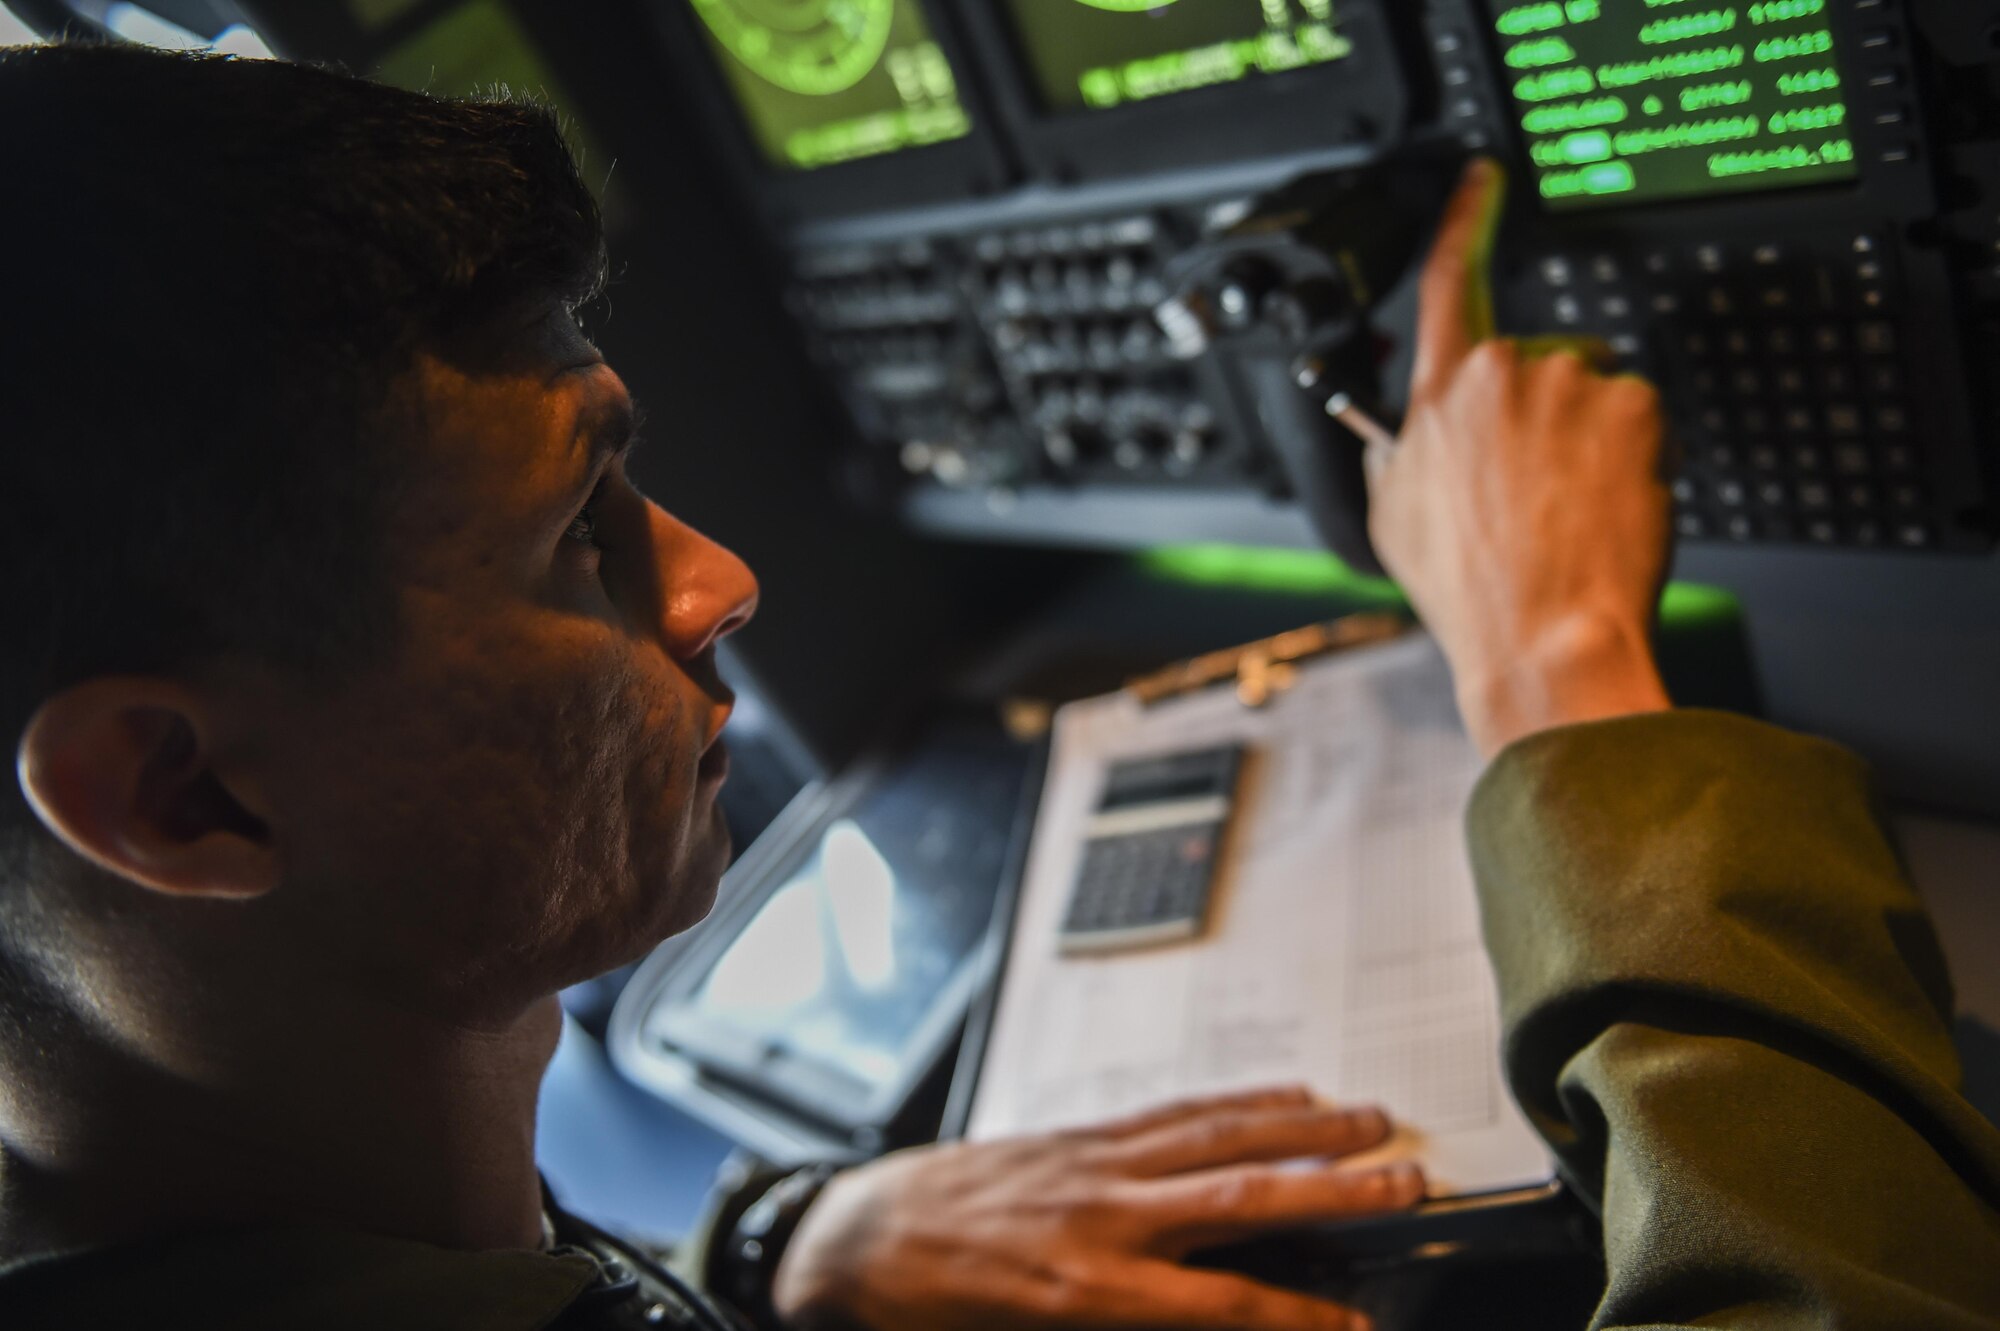 Staff Sgt. Oscar Garcia, a special missions aviator with the 1st Special Operations Group Detachment 2, calculates the weight and balance of an MC-130J Commando II during preflight checks at Lockheed Martin in Marietta, Ga., Dec. 11, 2015. The MC-130J will undergo modifications to become an AC-130J Ghostrider, which will provide the 1 SOW with close air support and air interdiction capabilities. (U.S. Air Force photo by Senior Airman Ryan Conroy)